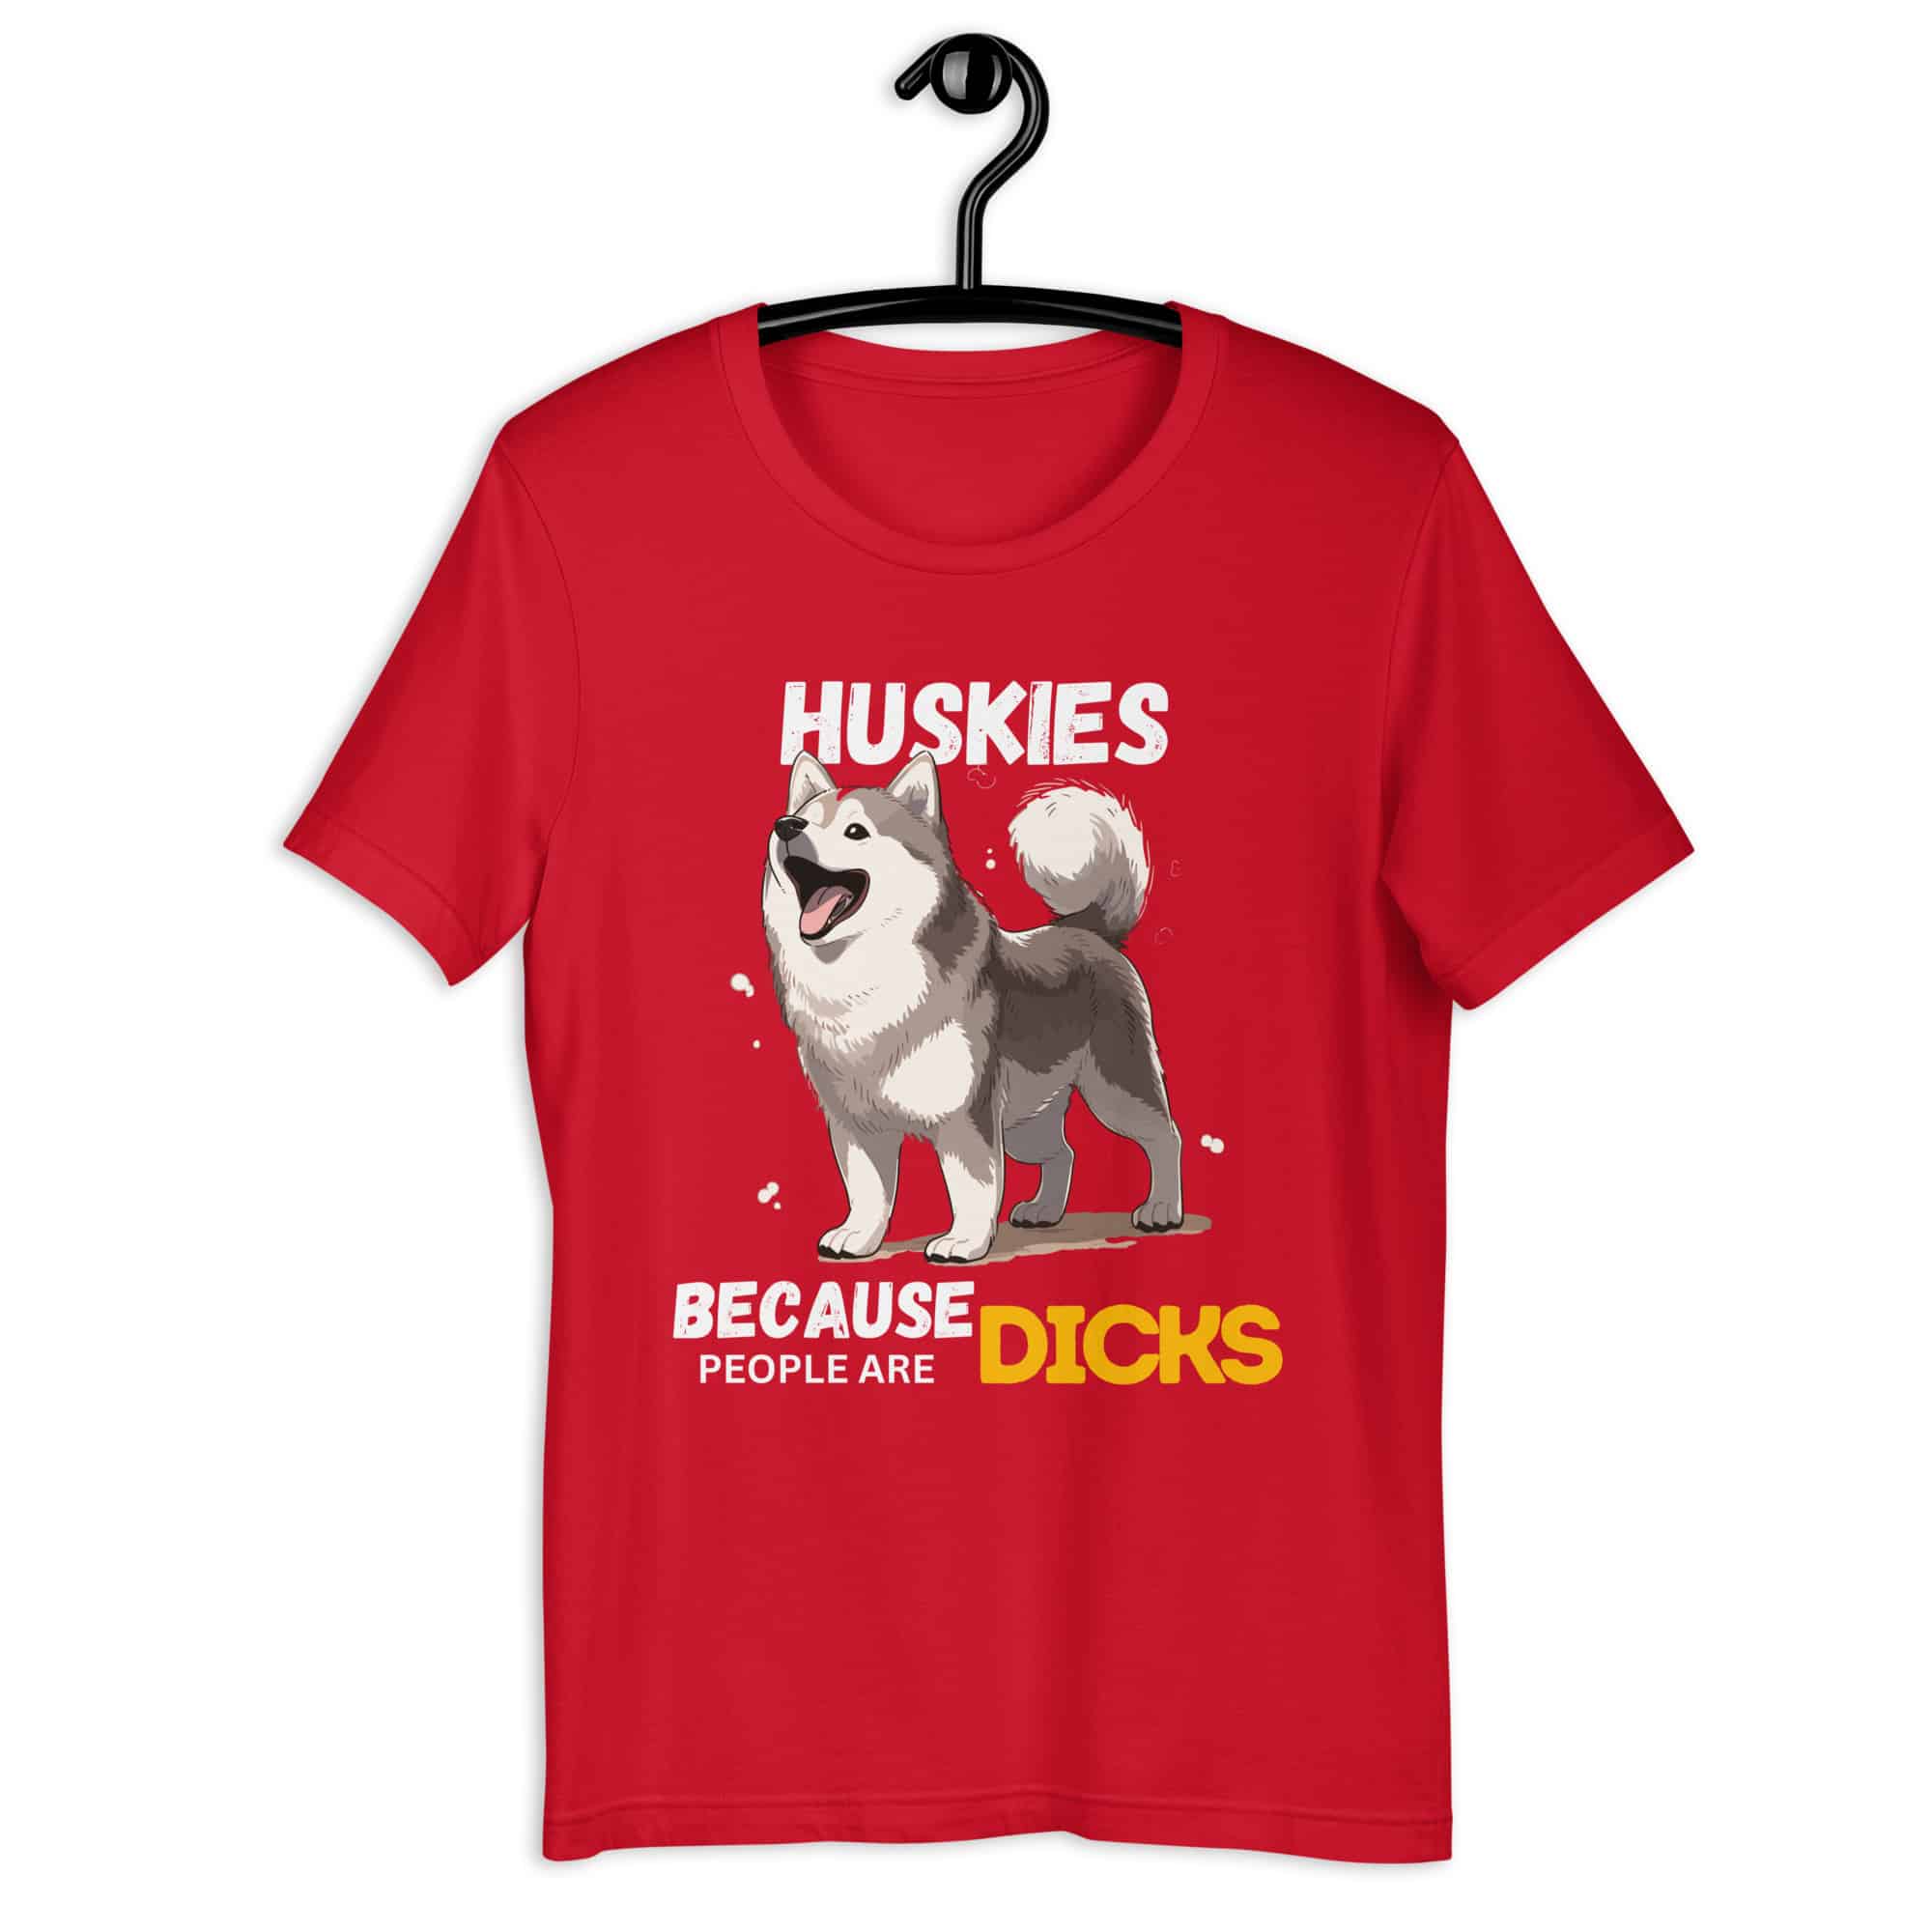 Huskies Because People Are Dicks Unisex T-Shirt red